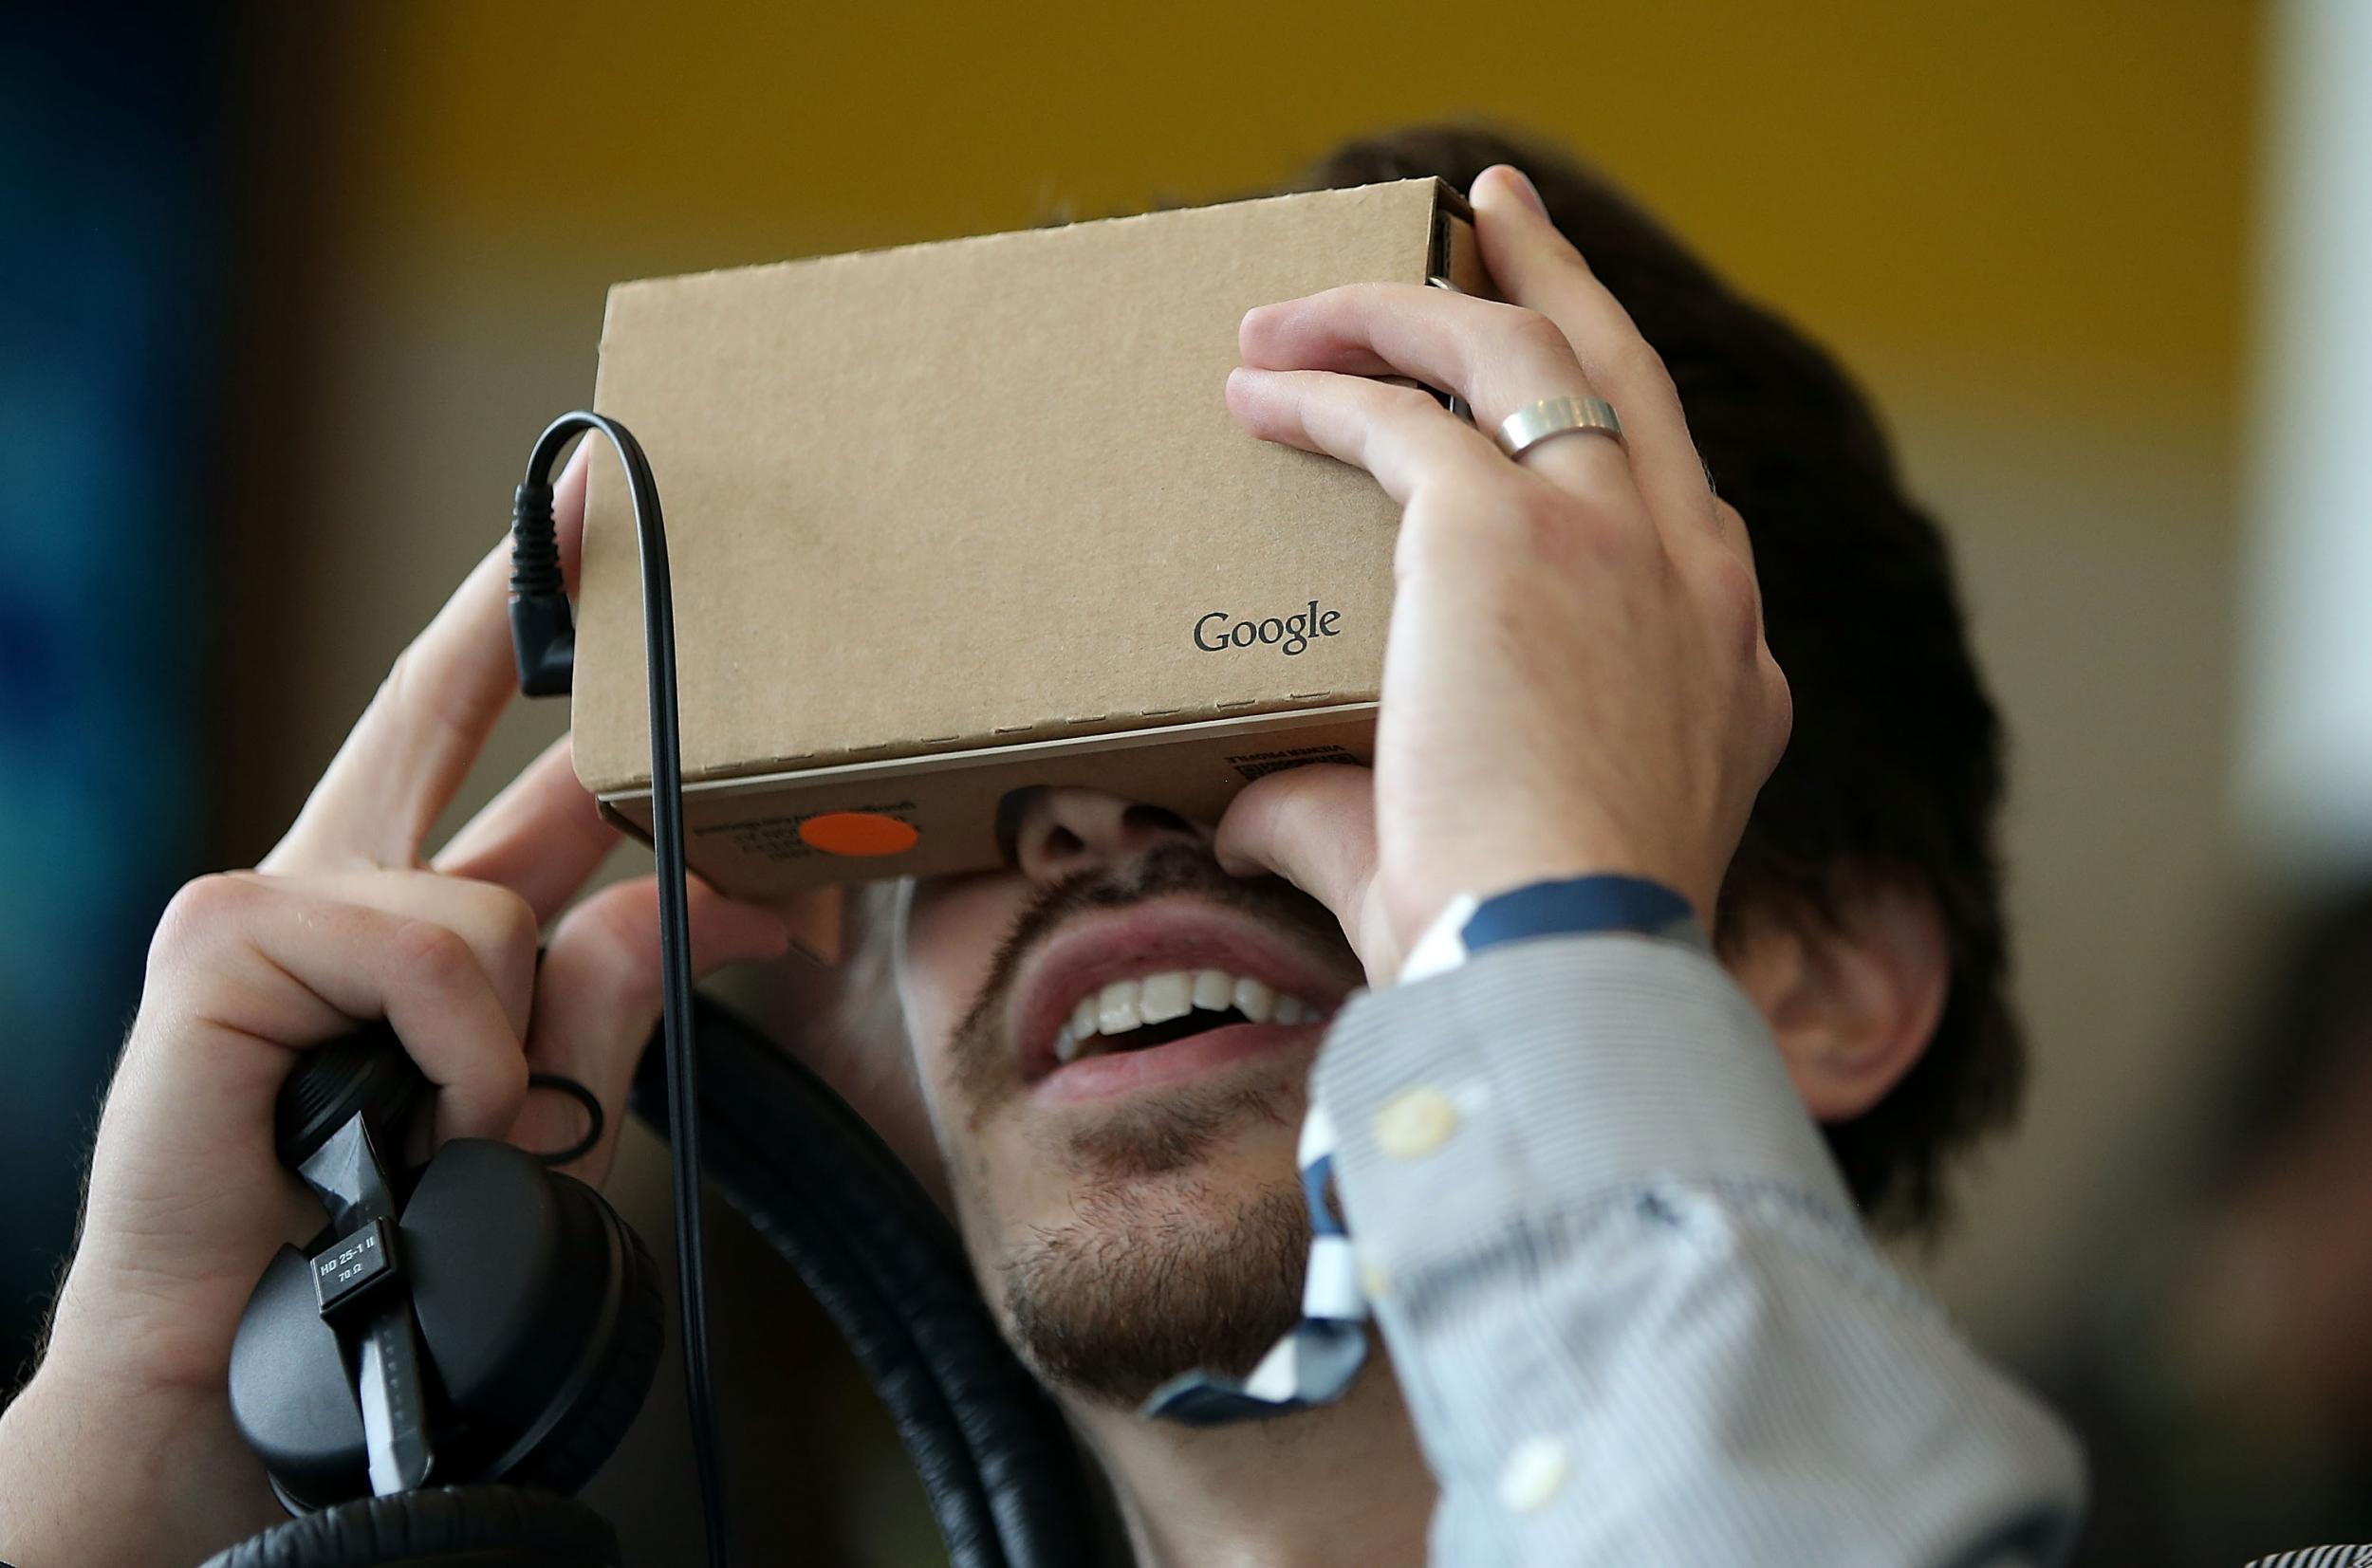 A man tries out the Google Cardboard VR headset at the 2015 Google I/O conference in San Francisco